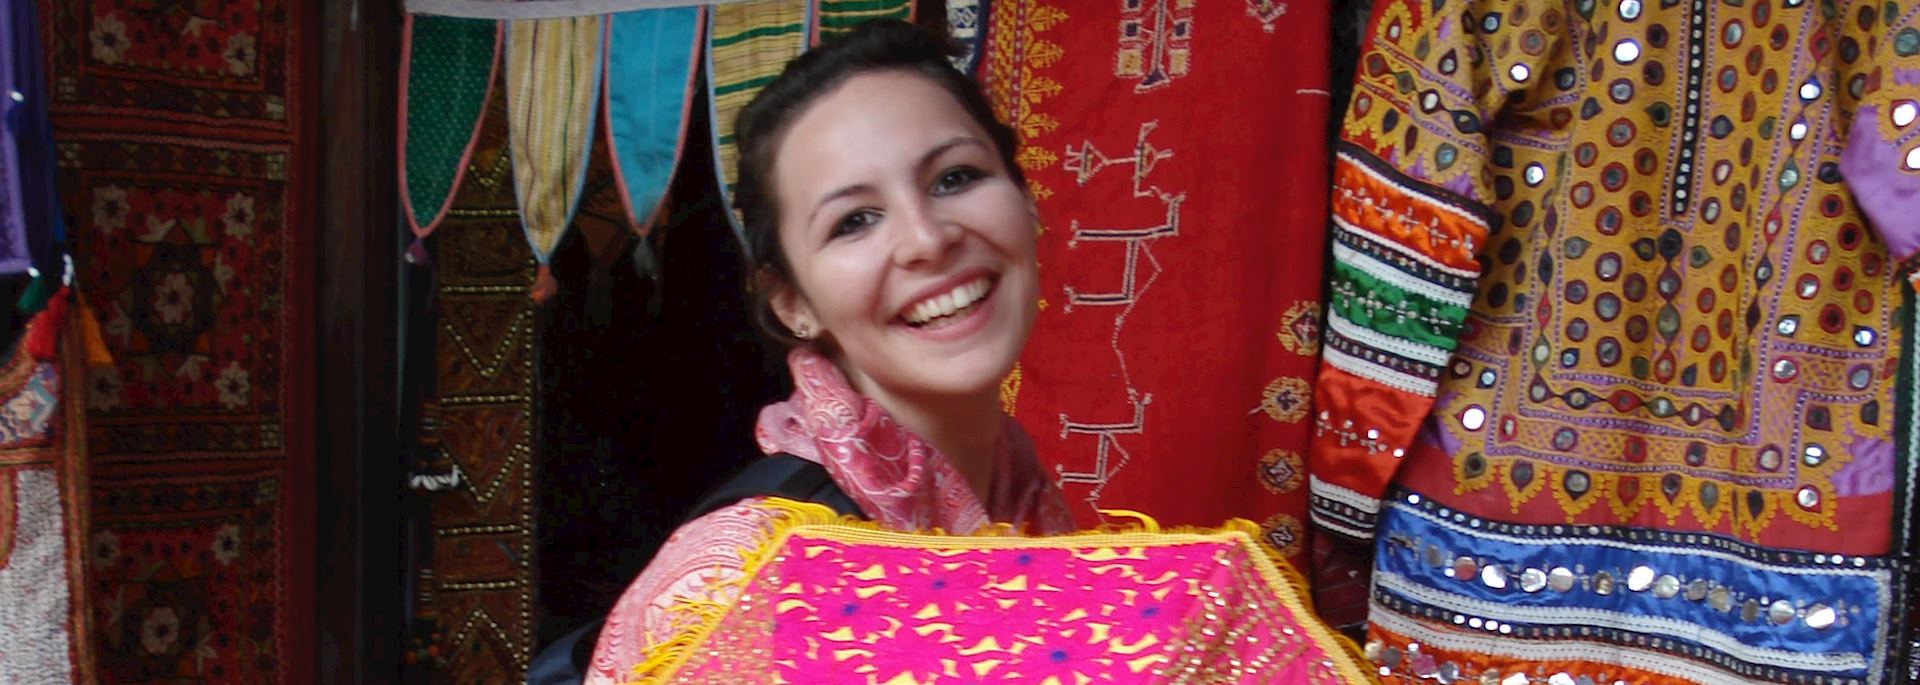 Sophie at a local market, India